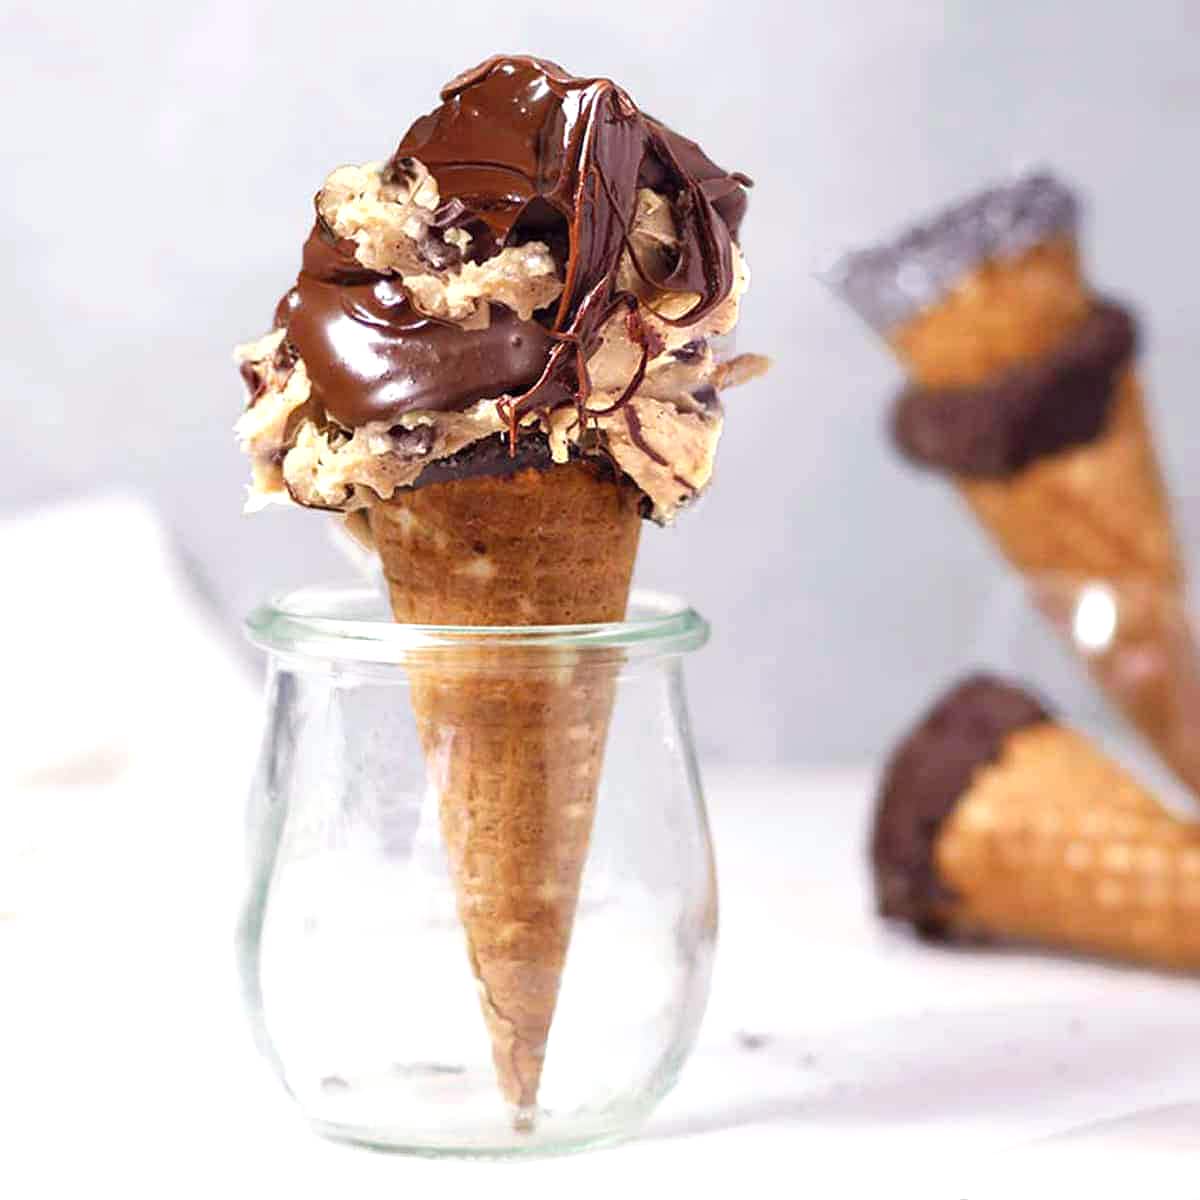 edible cookie dough in a cone with chocolate sauce.